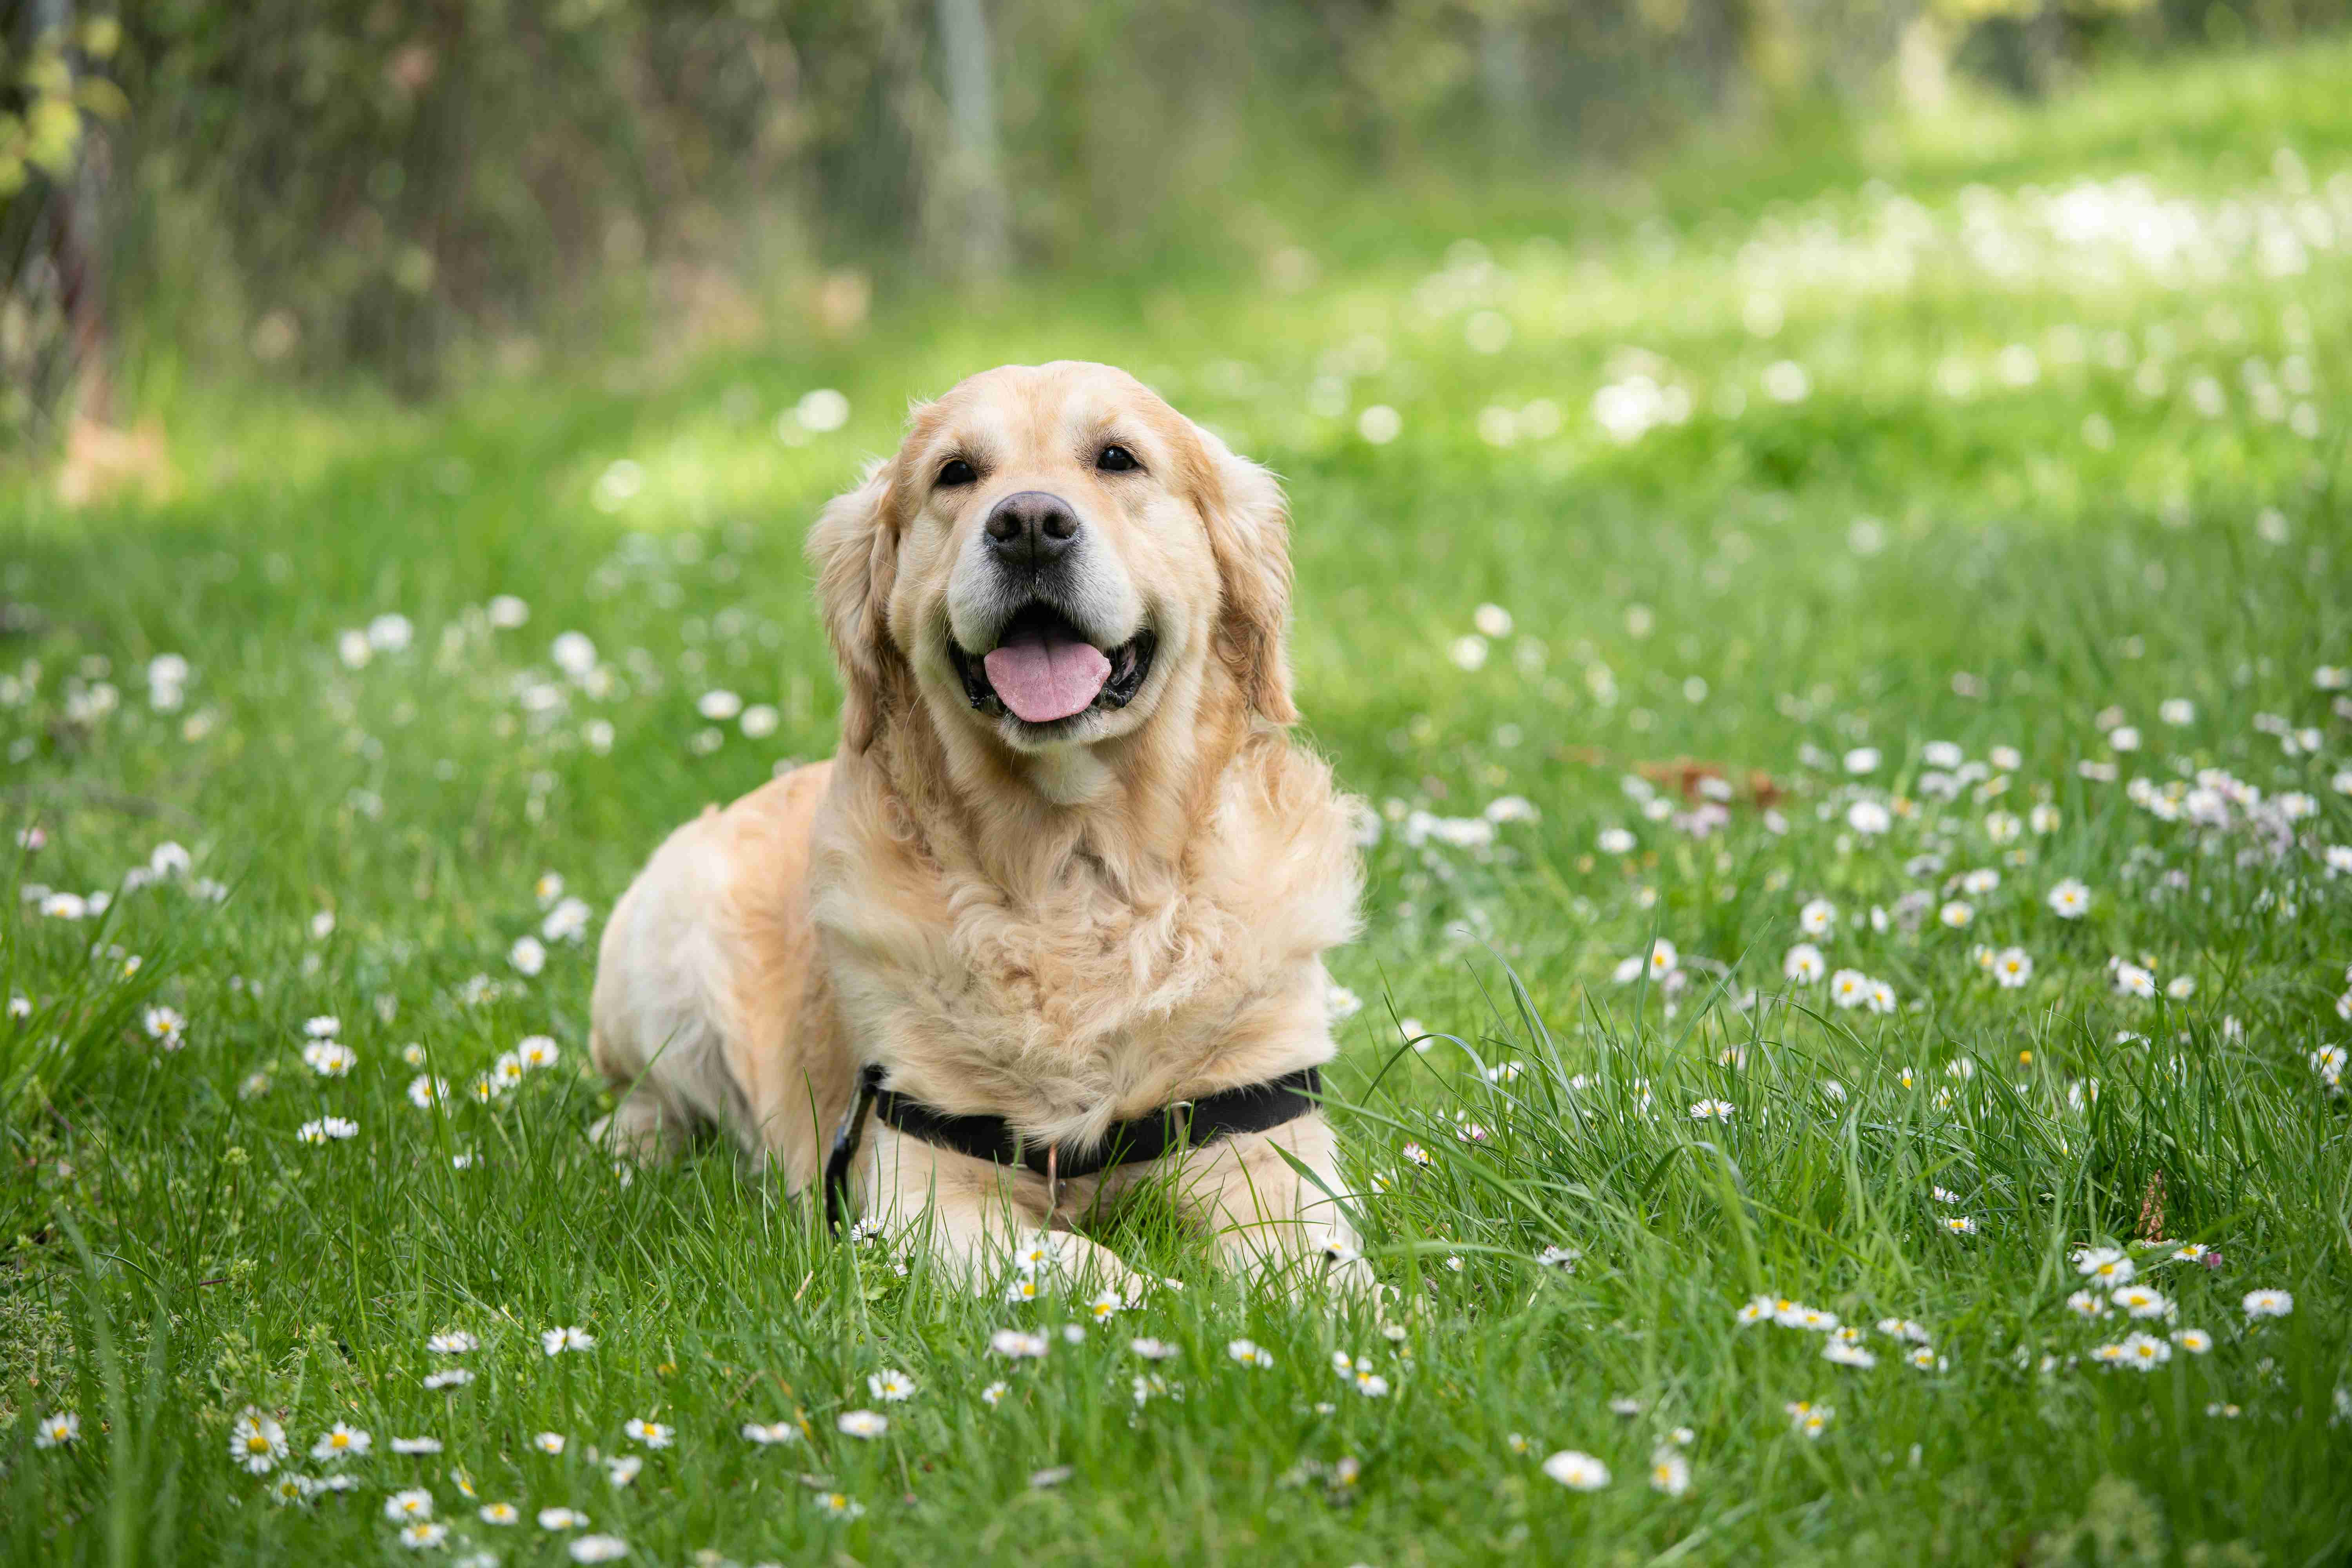 How can I prevent separation anxiety in my Golden Retriever?